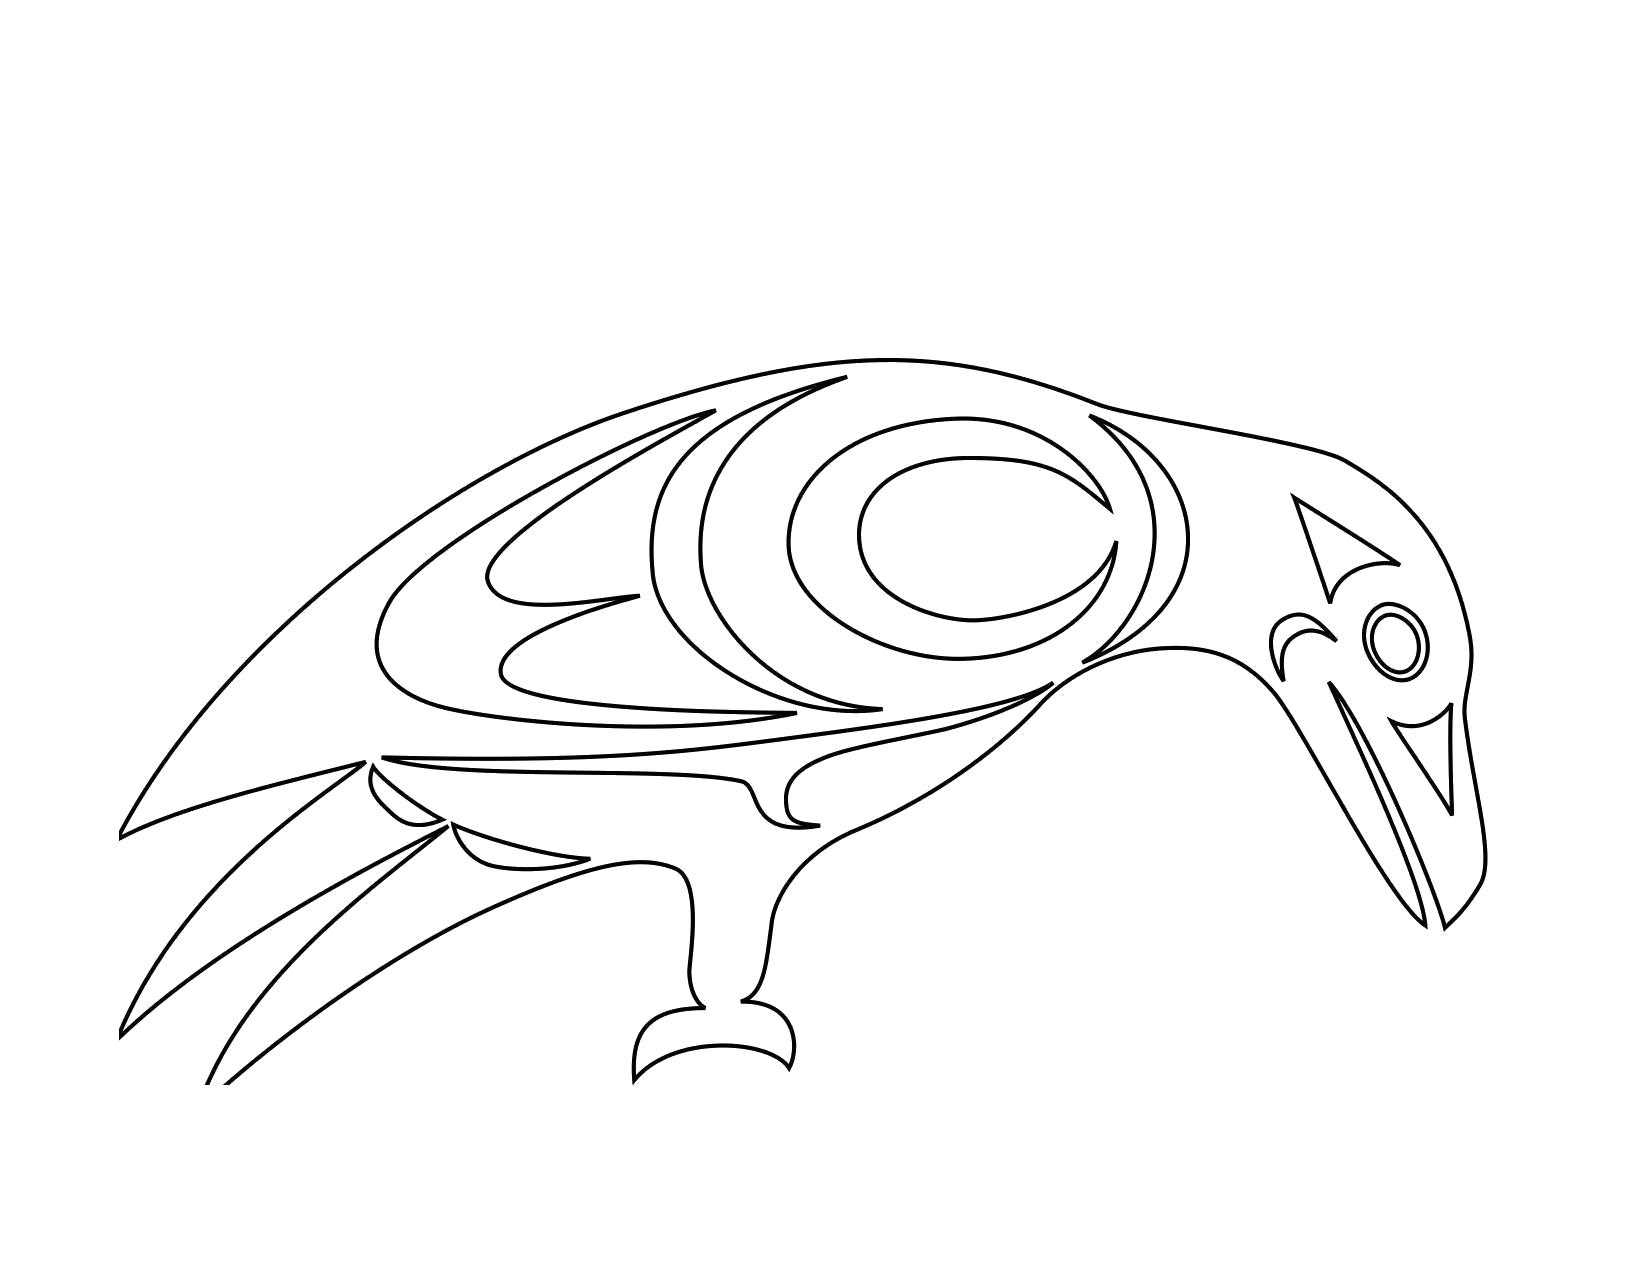 Coloring Raven. Category The contours for cutting out the birds. Tags:  Raven.